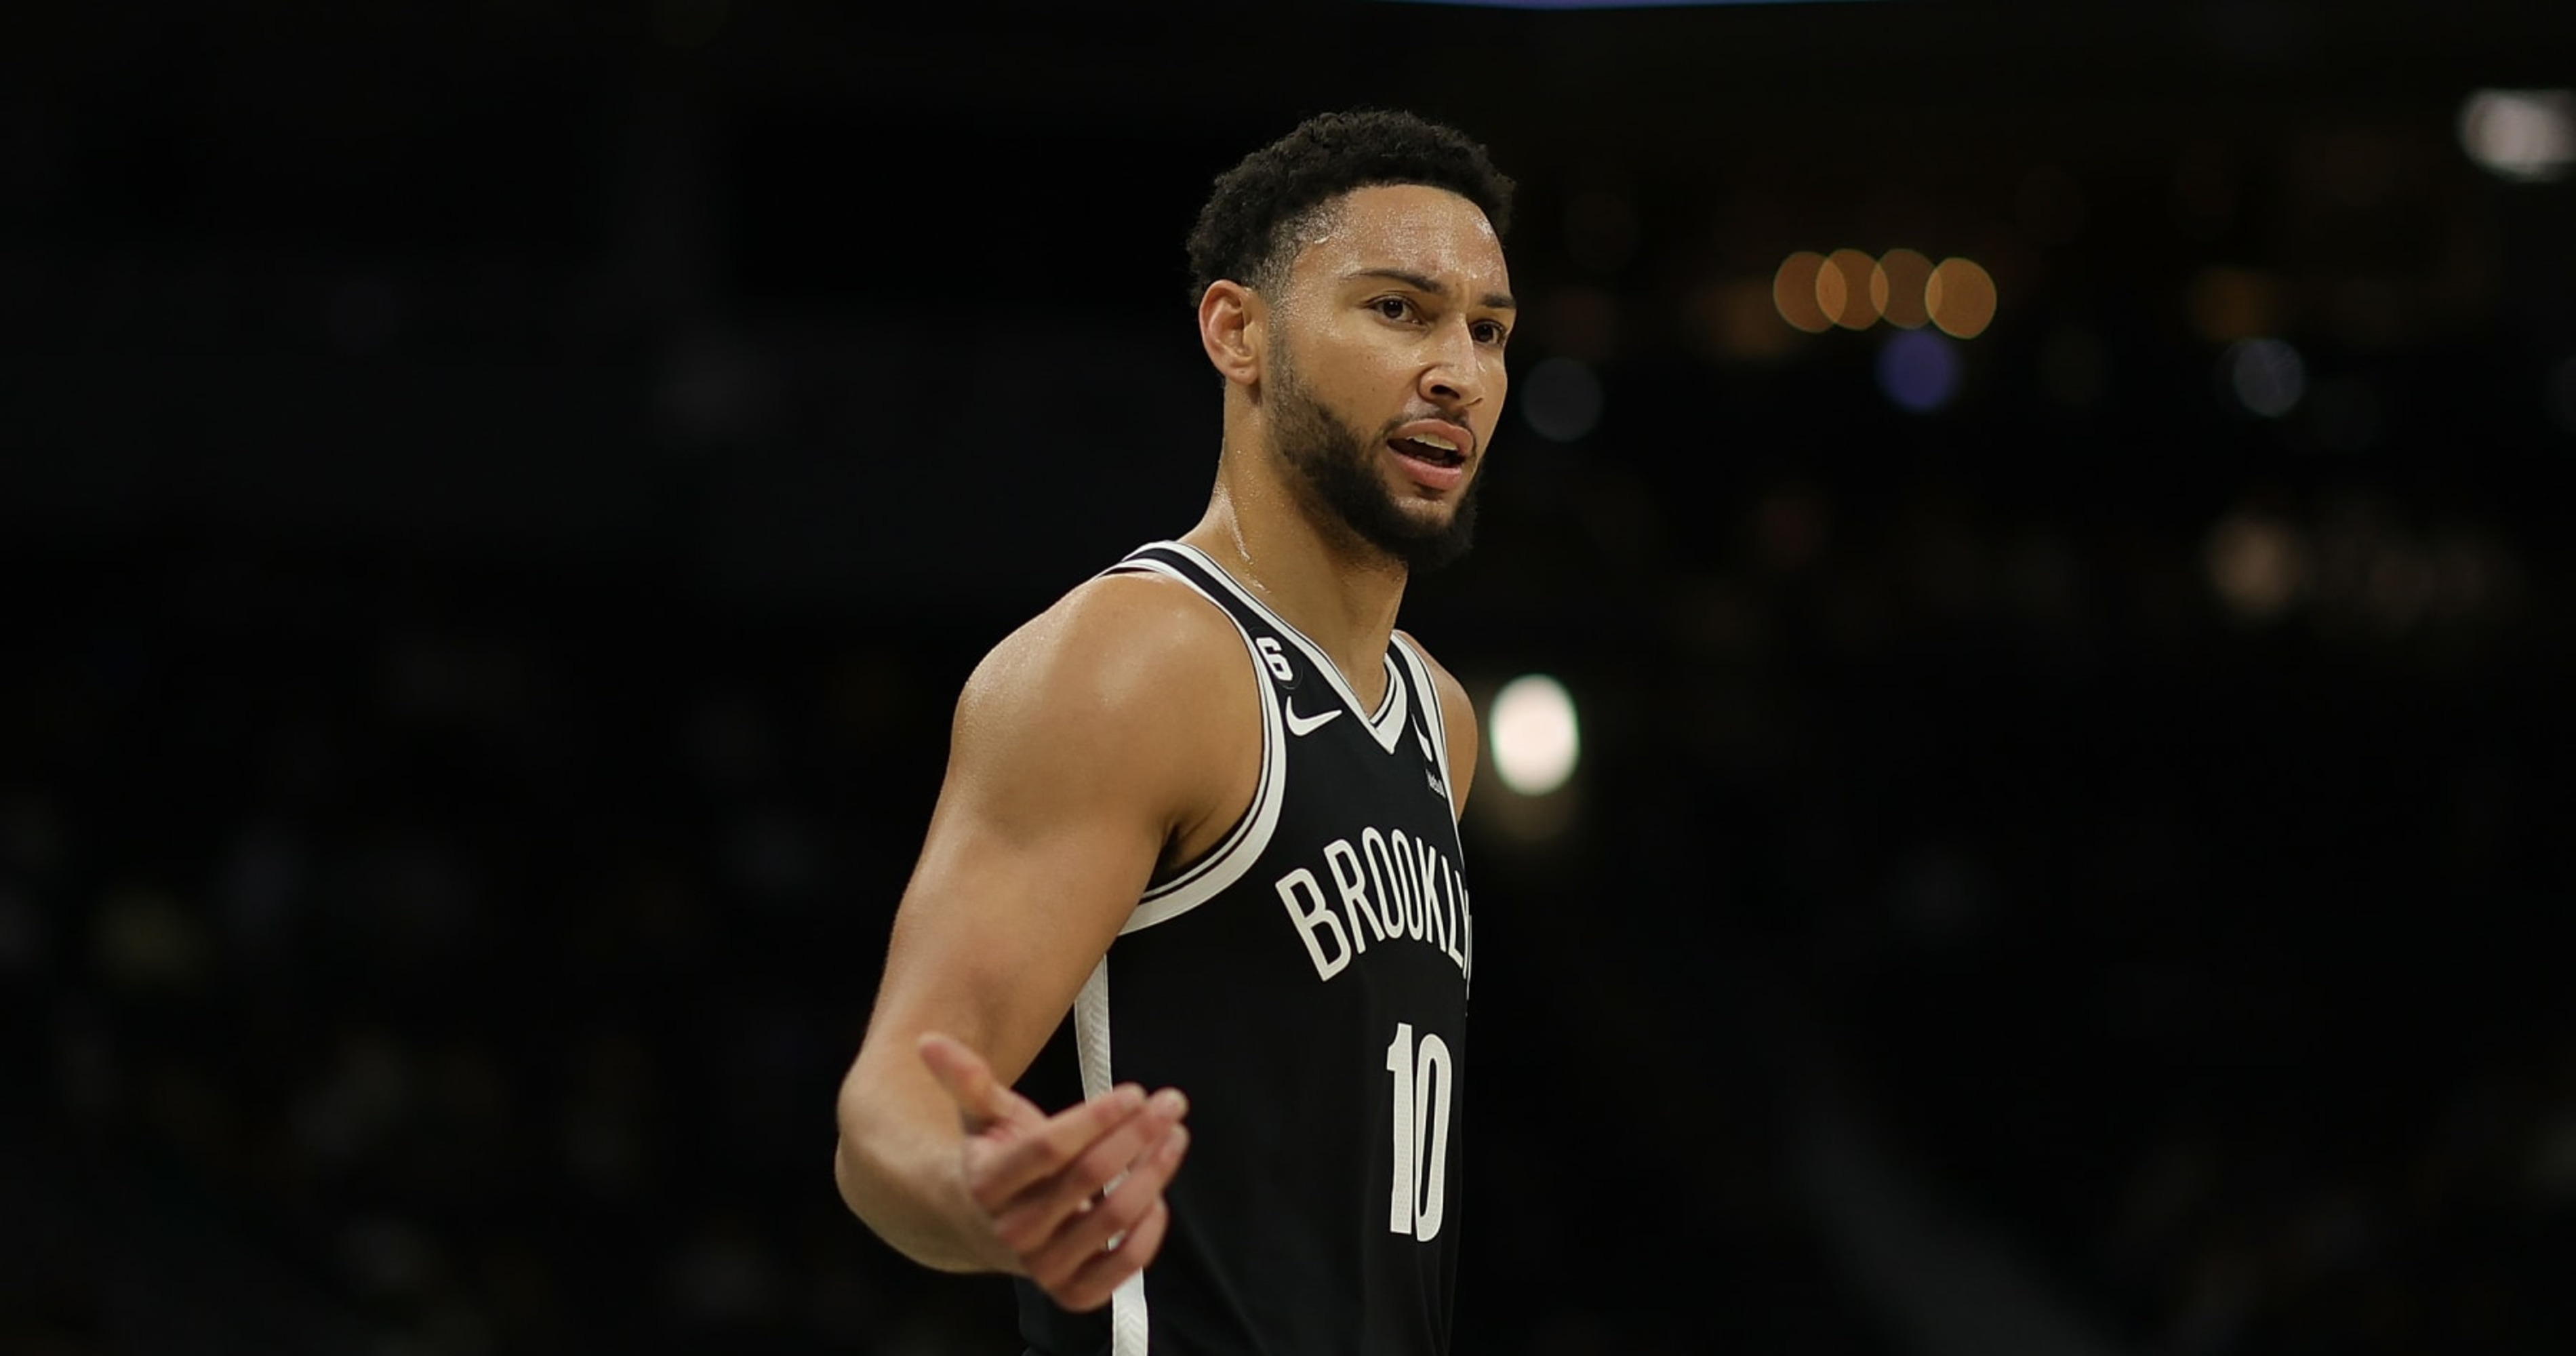 Philly Fans Can't Wait To Show Ben Simmons Some 'Brotherly Love' During  Thursday's Sixers-Nets Game - CBS Philadelphia